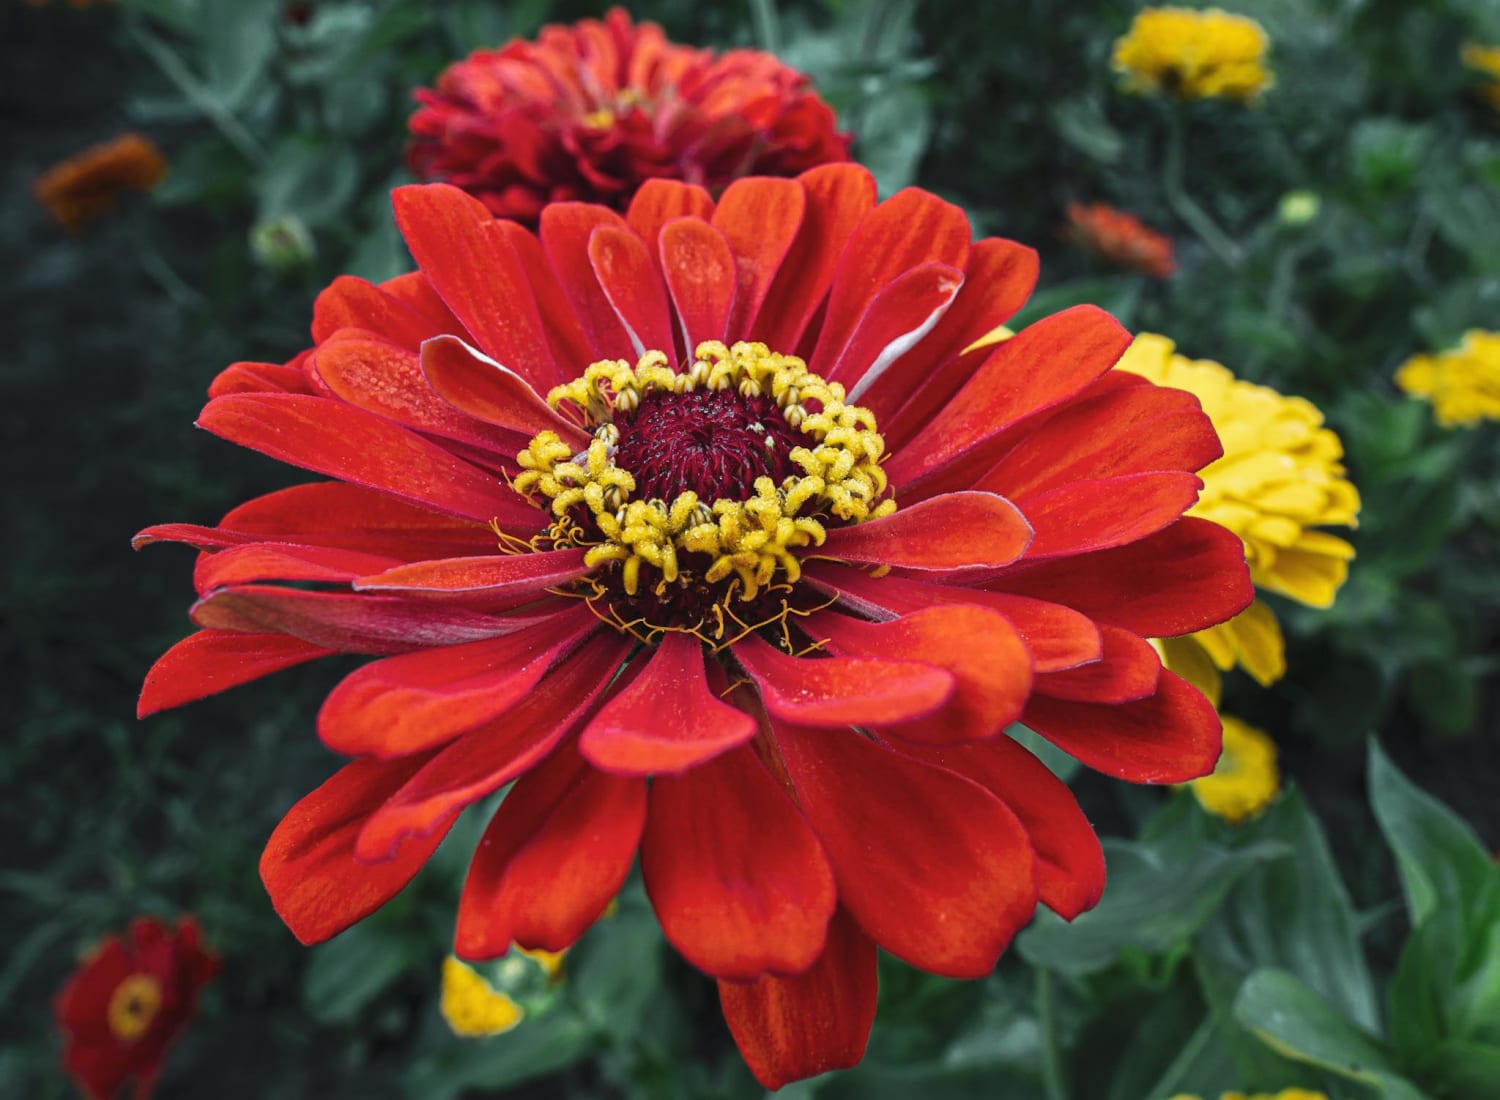 Every year I grow state fair zinnias and they’re the best. Here’s a photo of my garden from last season.